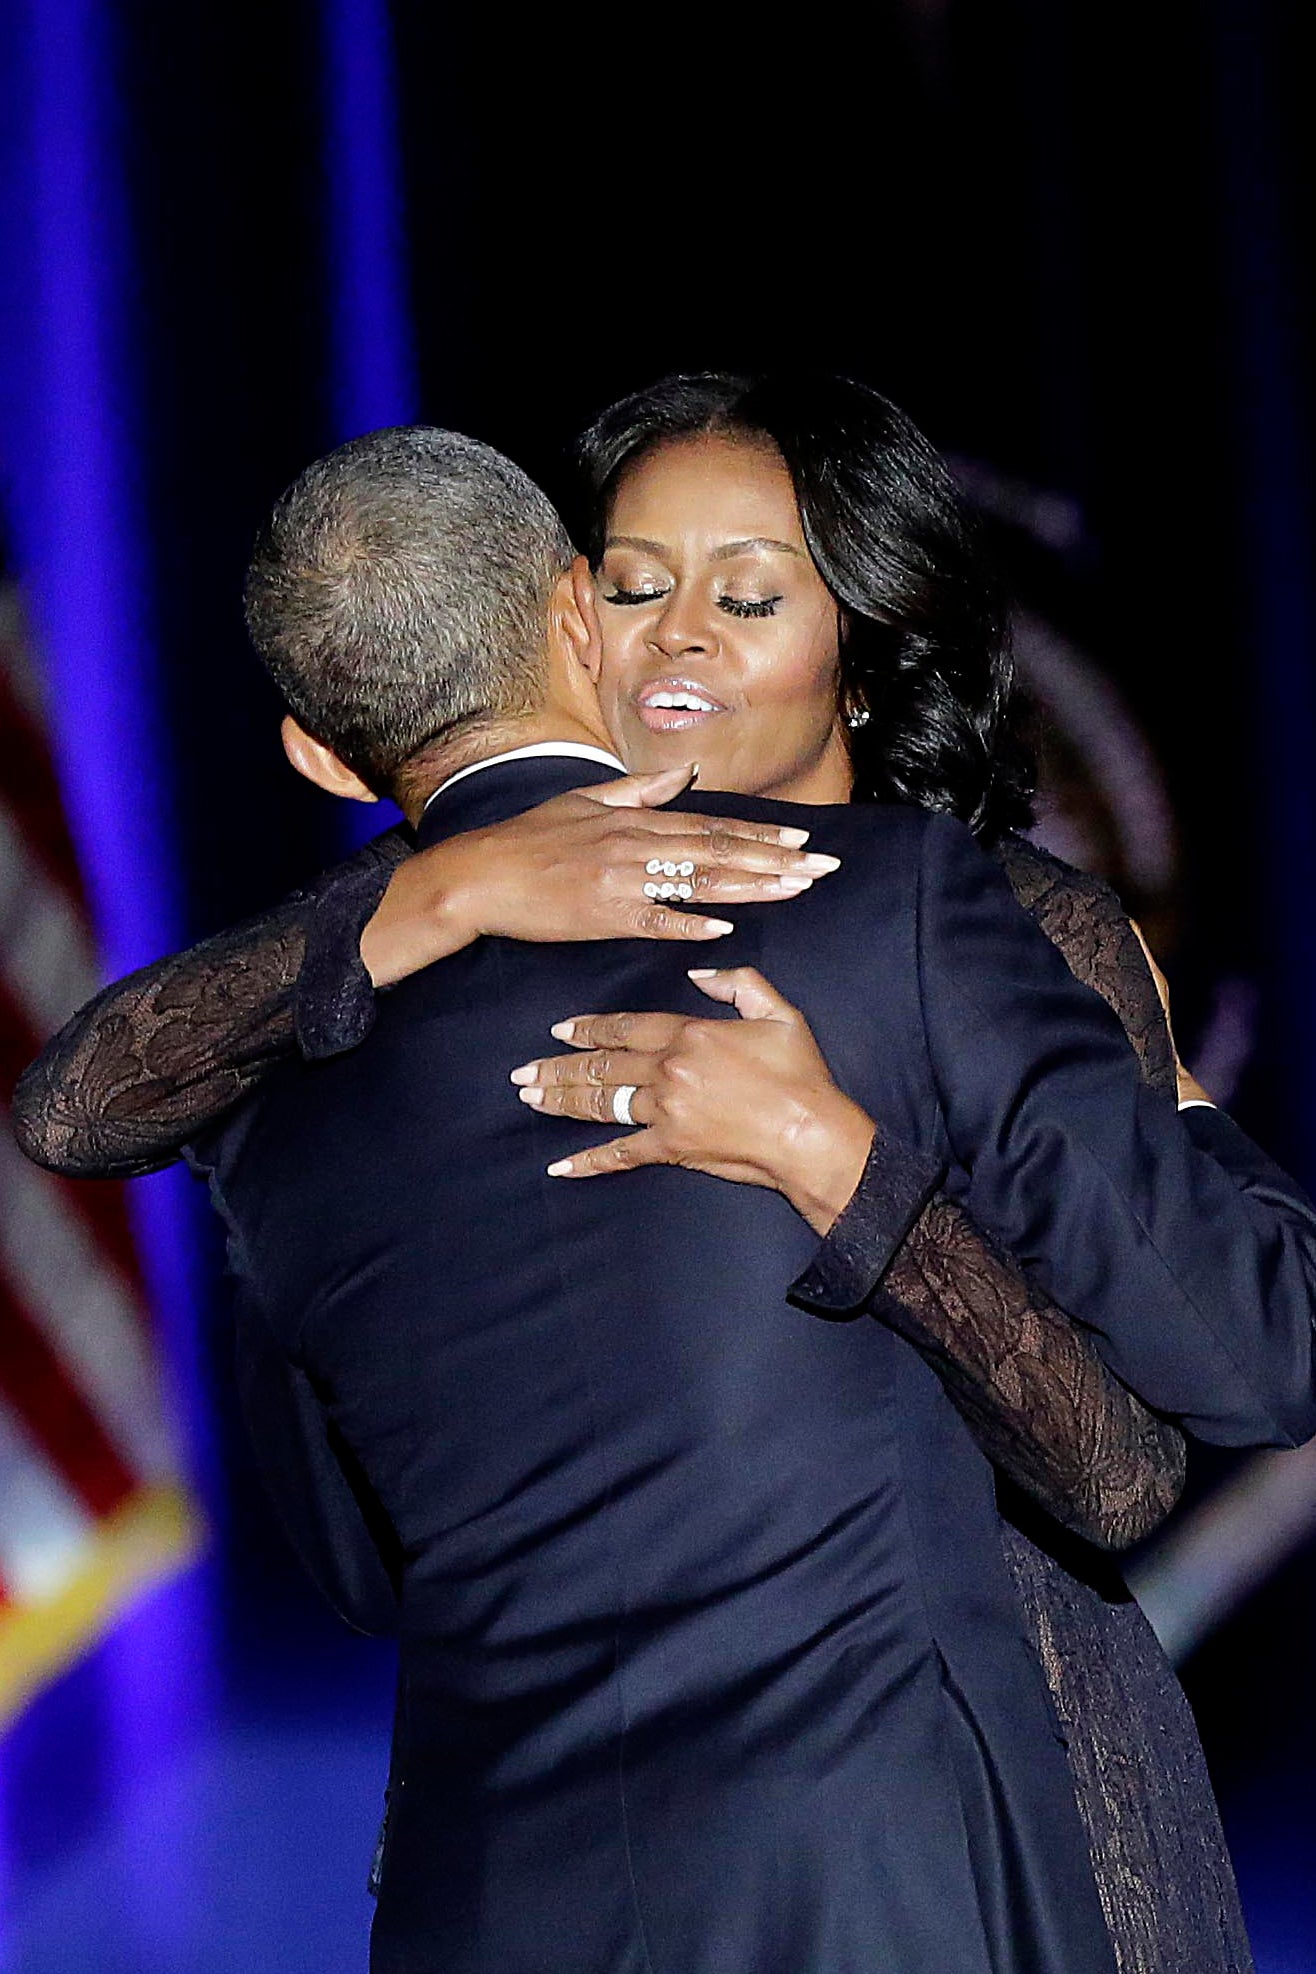 The 25 Most Touching Photos From President Obama's Farewell Speech
